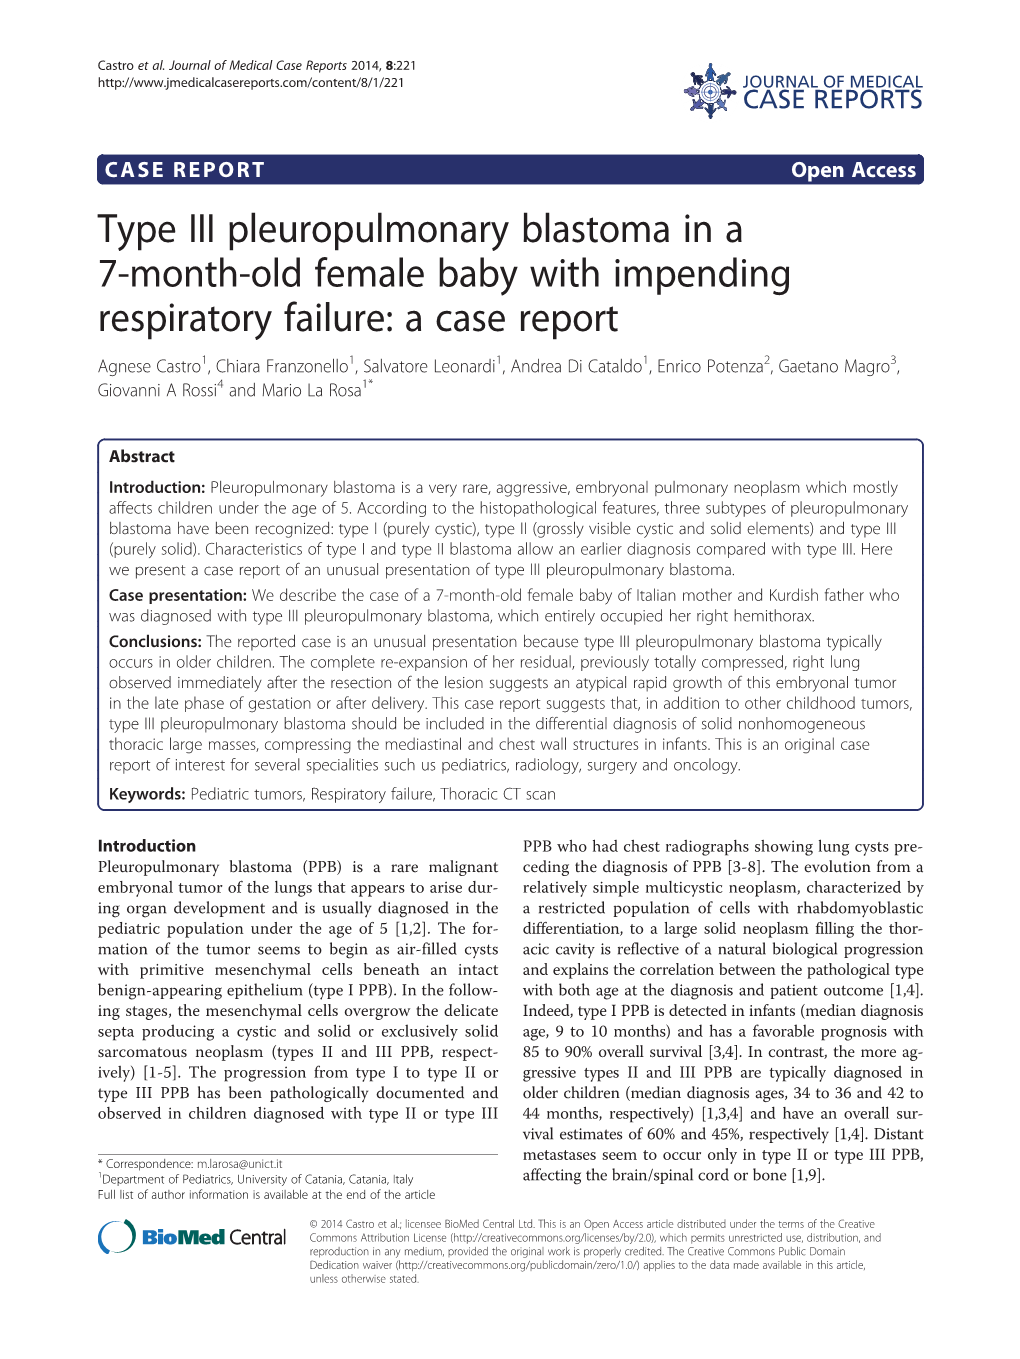 Type III Pleuropulmonary Blastoma in a 7-Month-Old Female Baby With